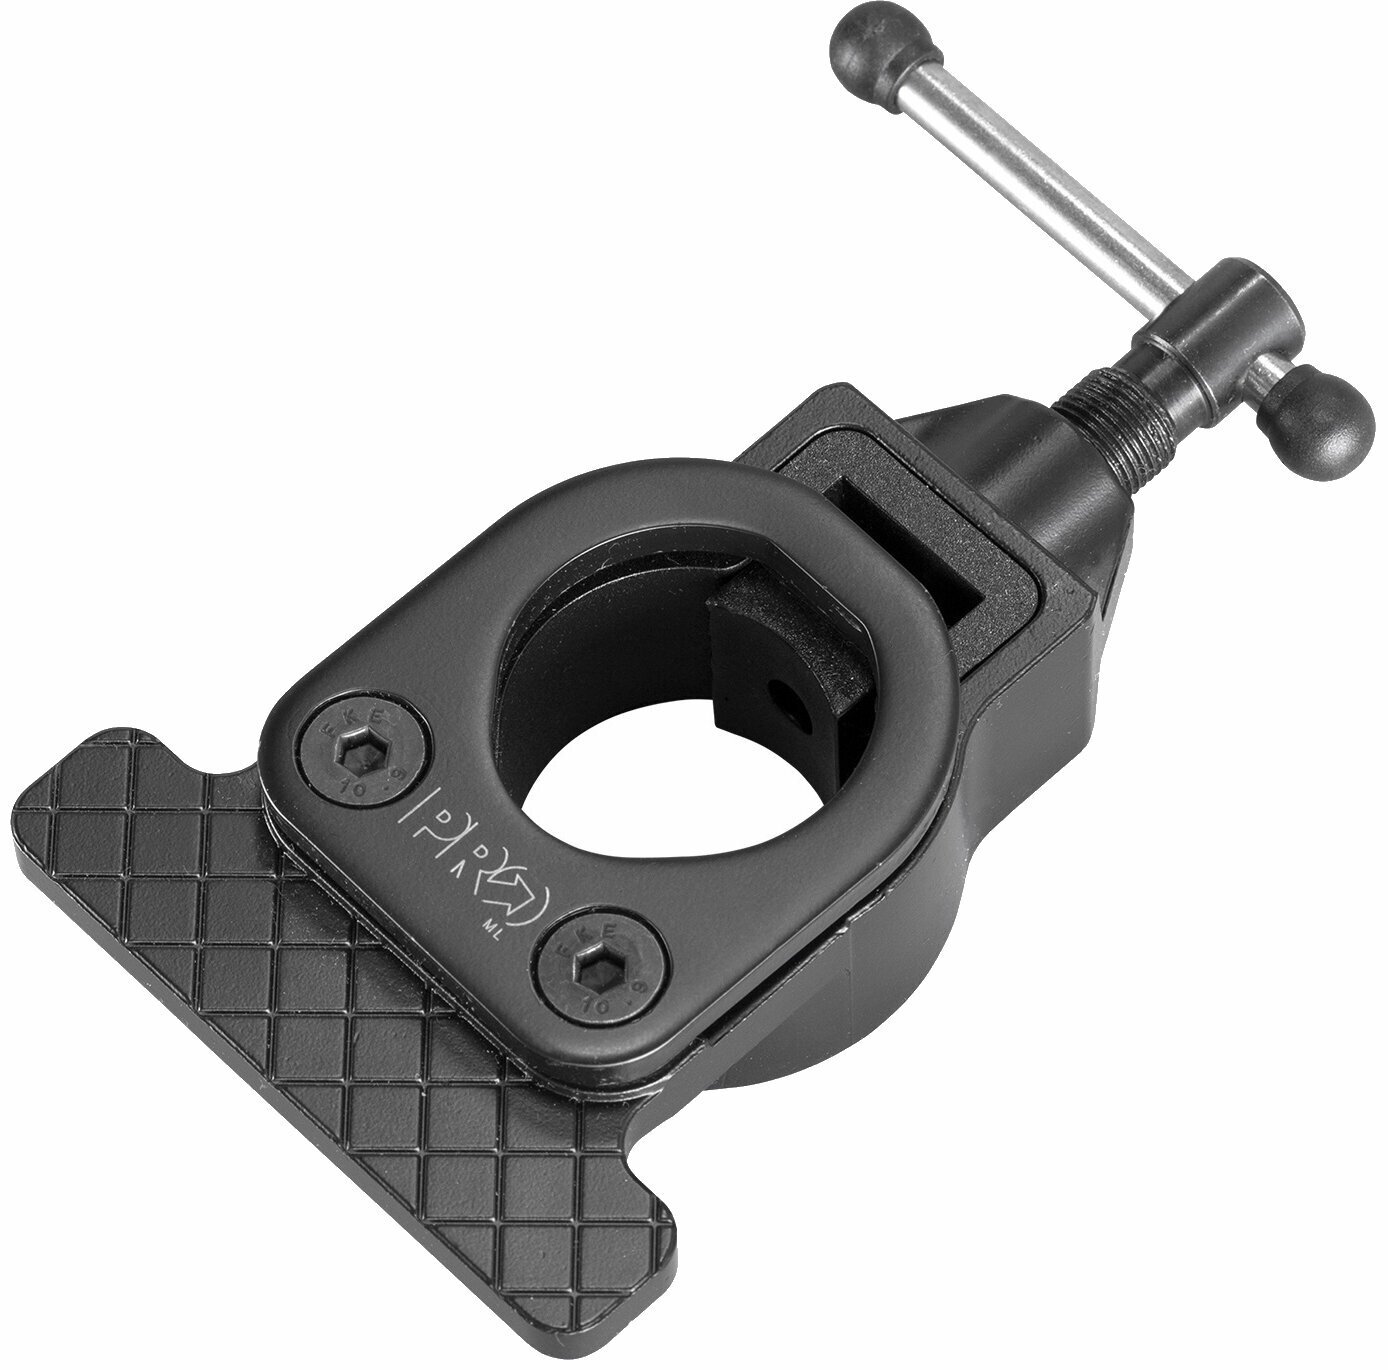 Tool PRO Saw Guide Tool